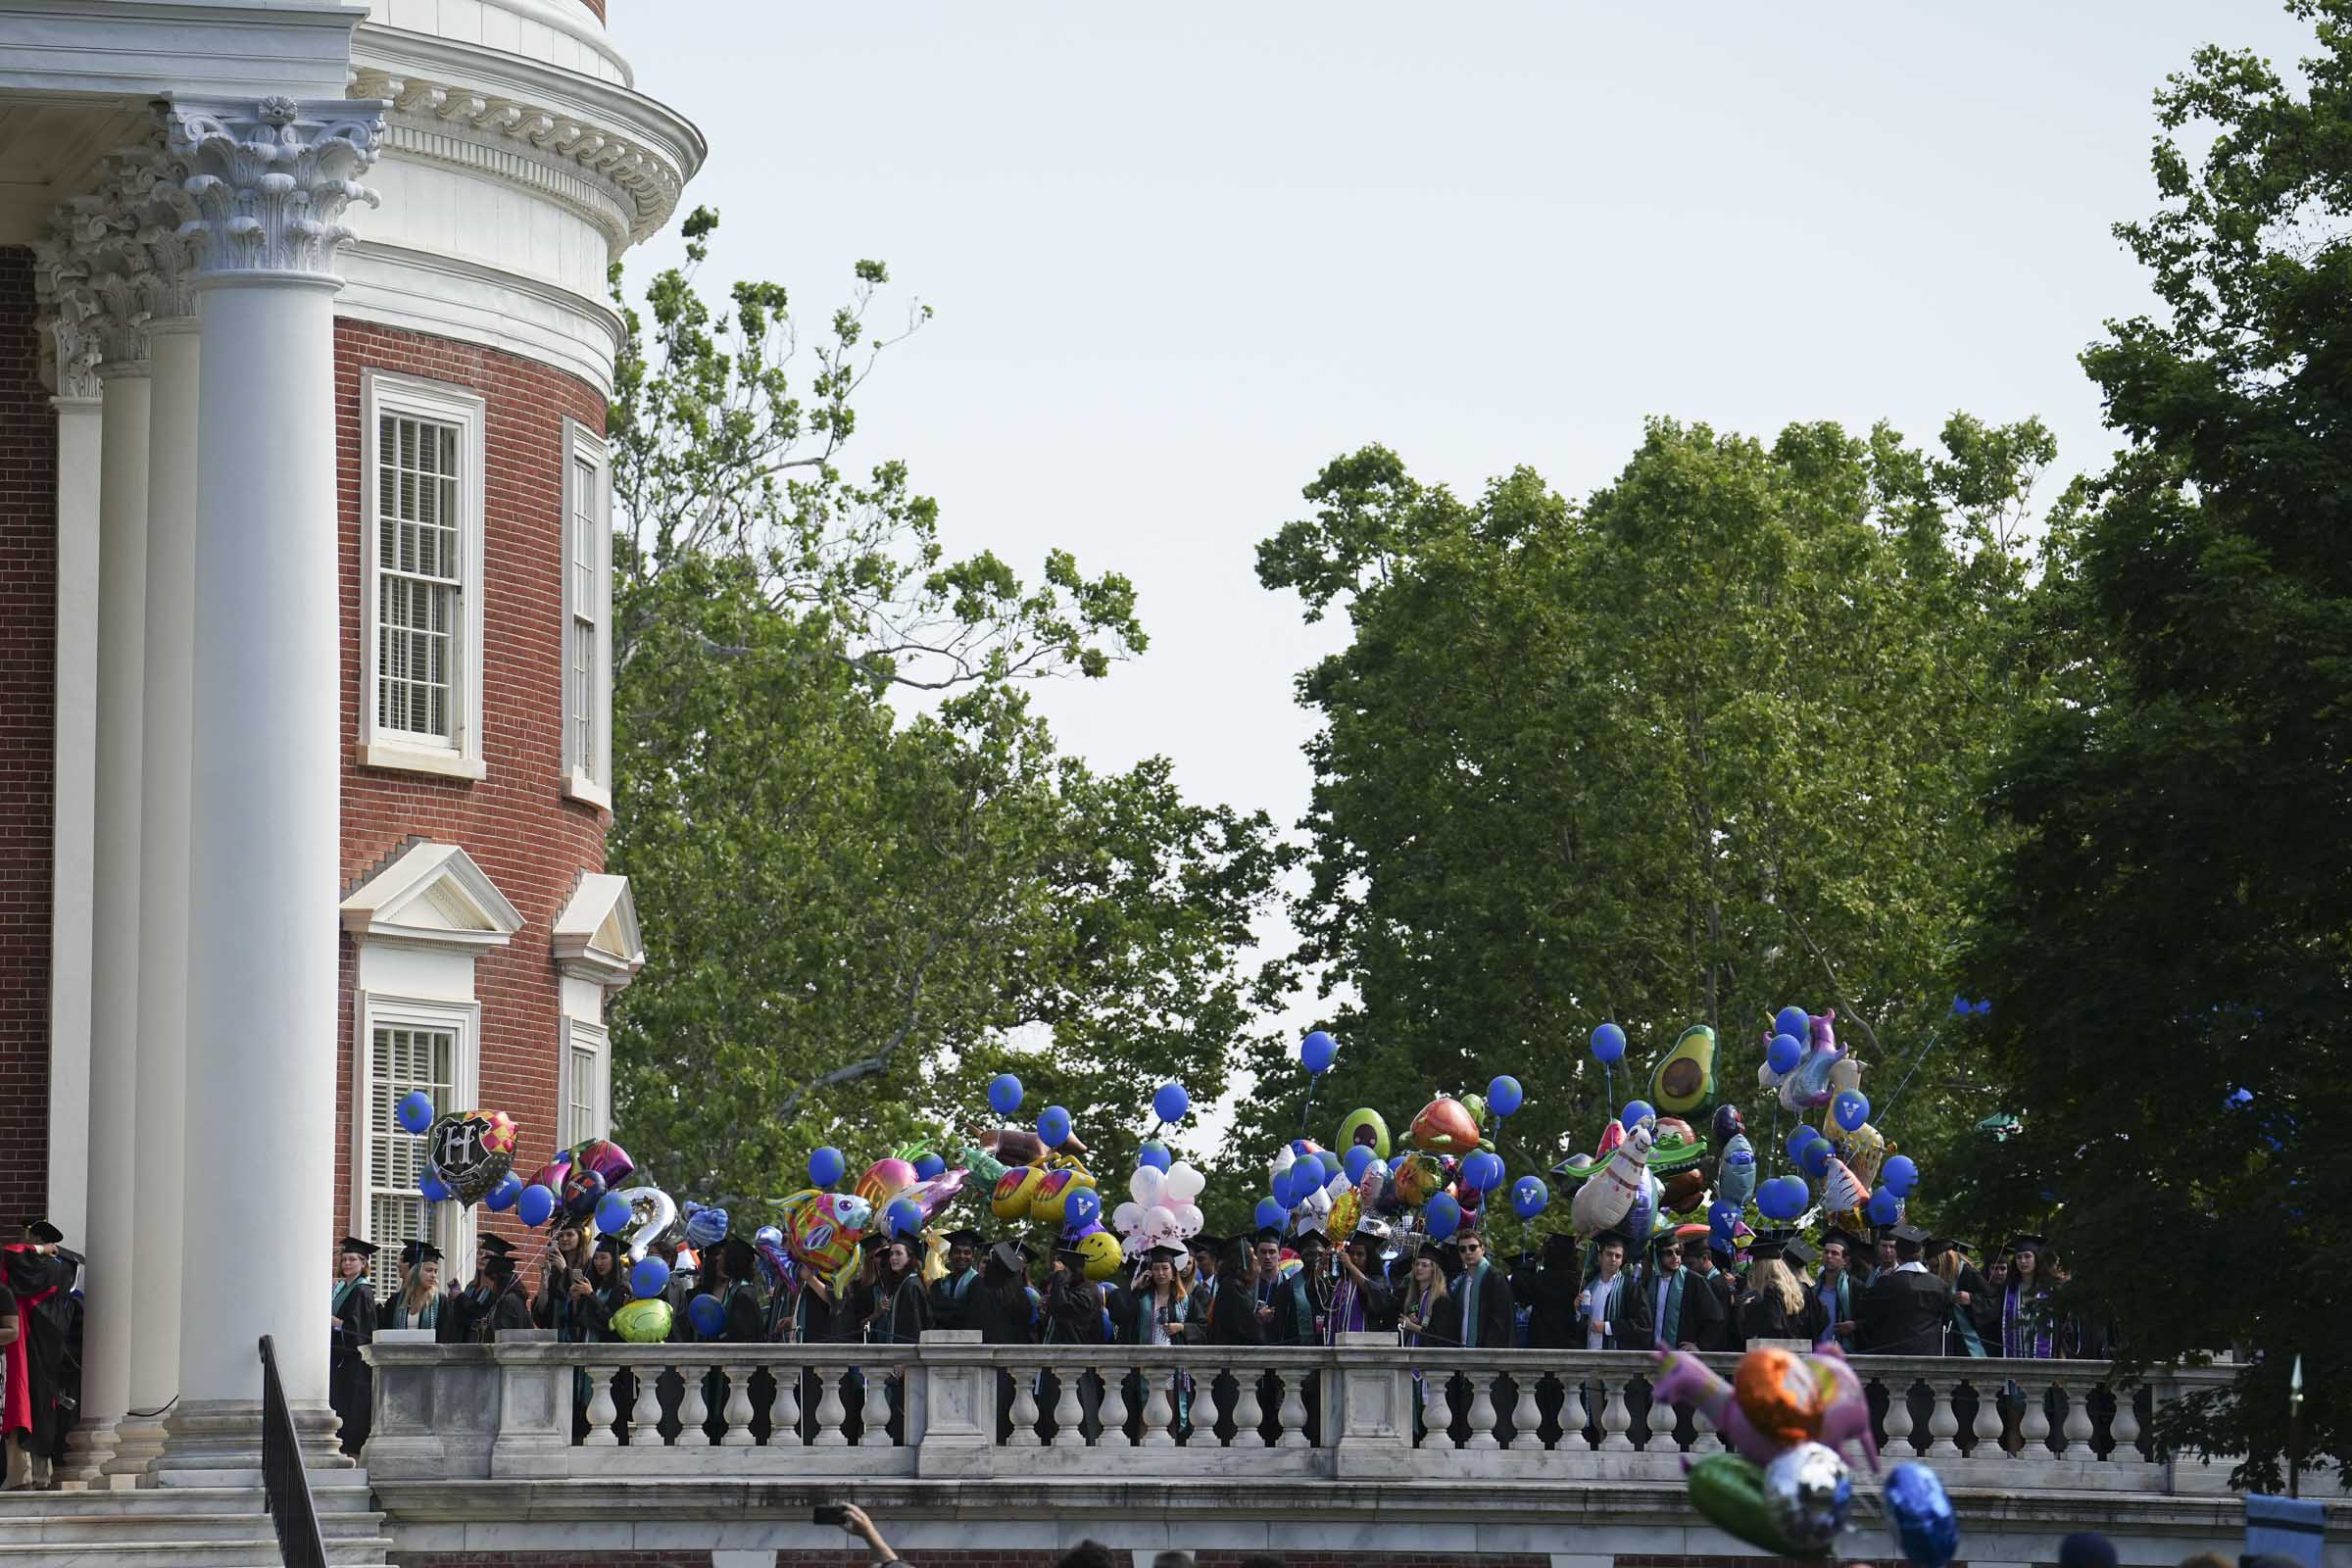 Dozens of students with balloons rising above them gather on the Rotunda’s plaza as they wait their turn to march down the Lawn.